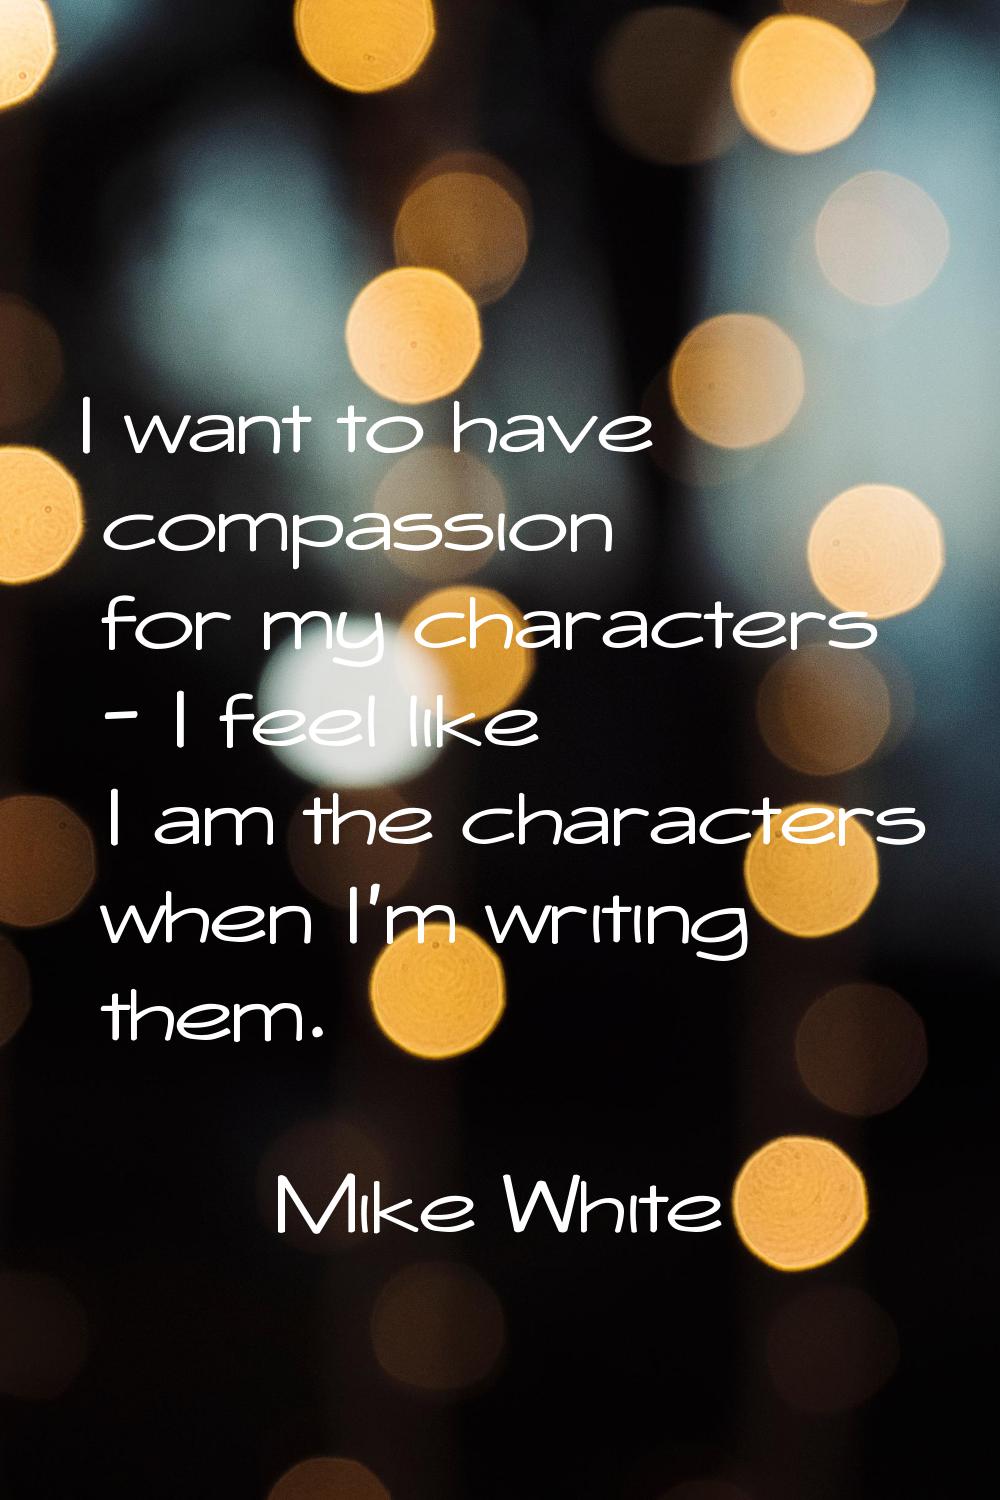 I want to have compassion for my characters - I feel like I am the characters when I'm writing them